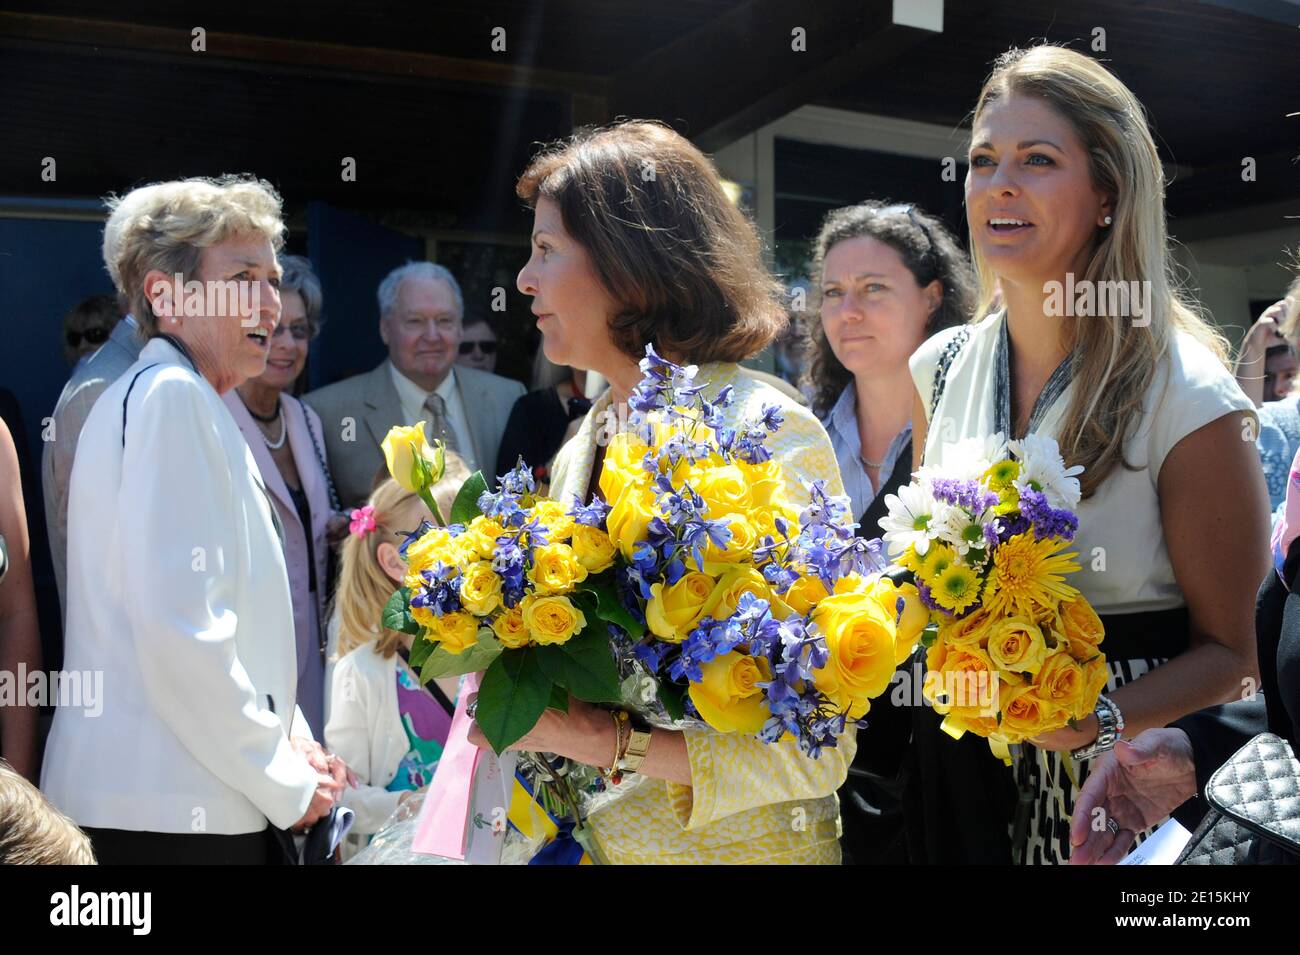 Queen Silvia and Princess Madeleine of Sweden meet and greet with parishioners at the Congregational Church in Boca Raton, FL, USA on April 3, 2011. Photo by Guerin/Taamallah/ABACAPRESS.COM Stock Photo